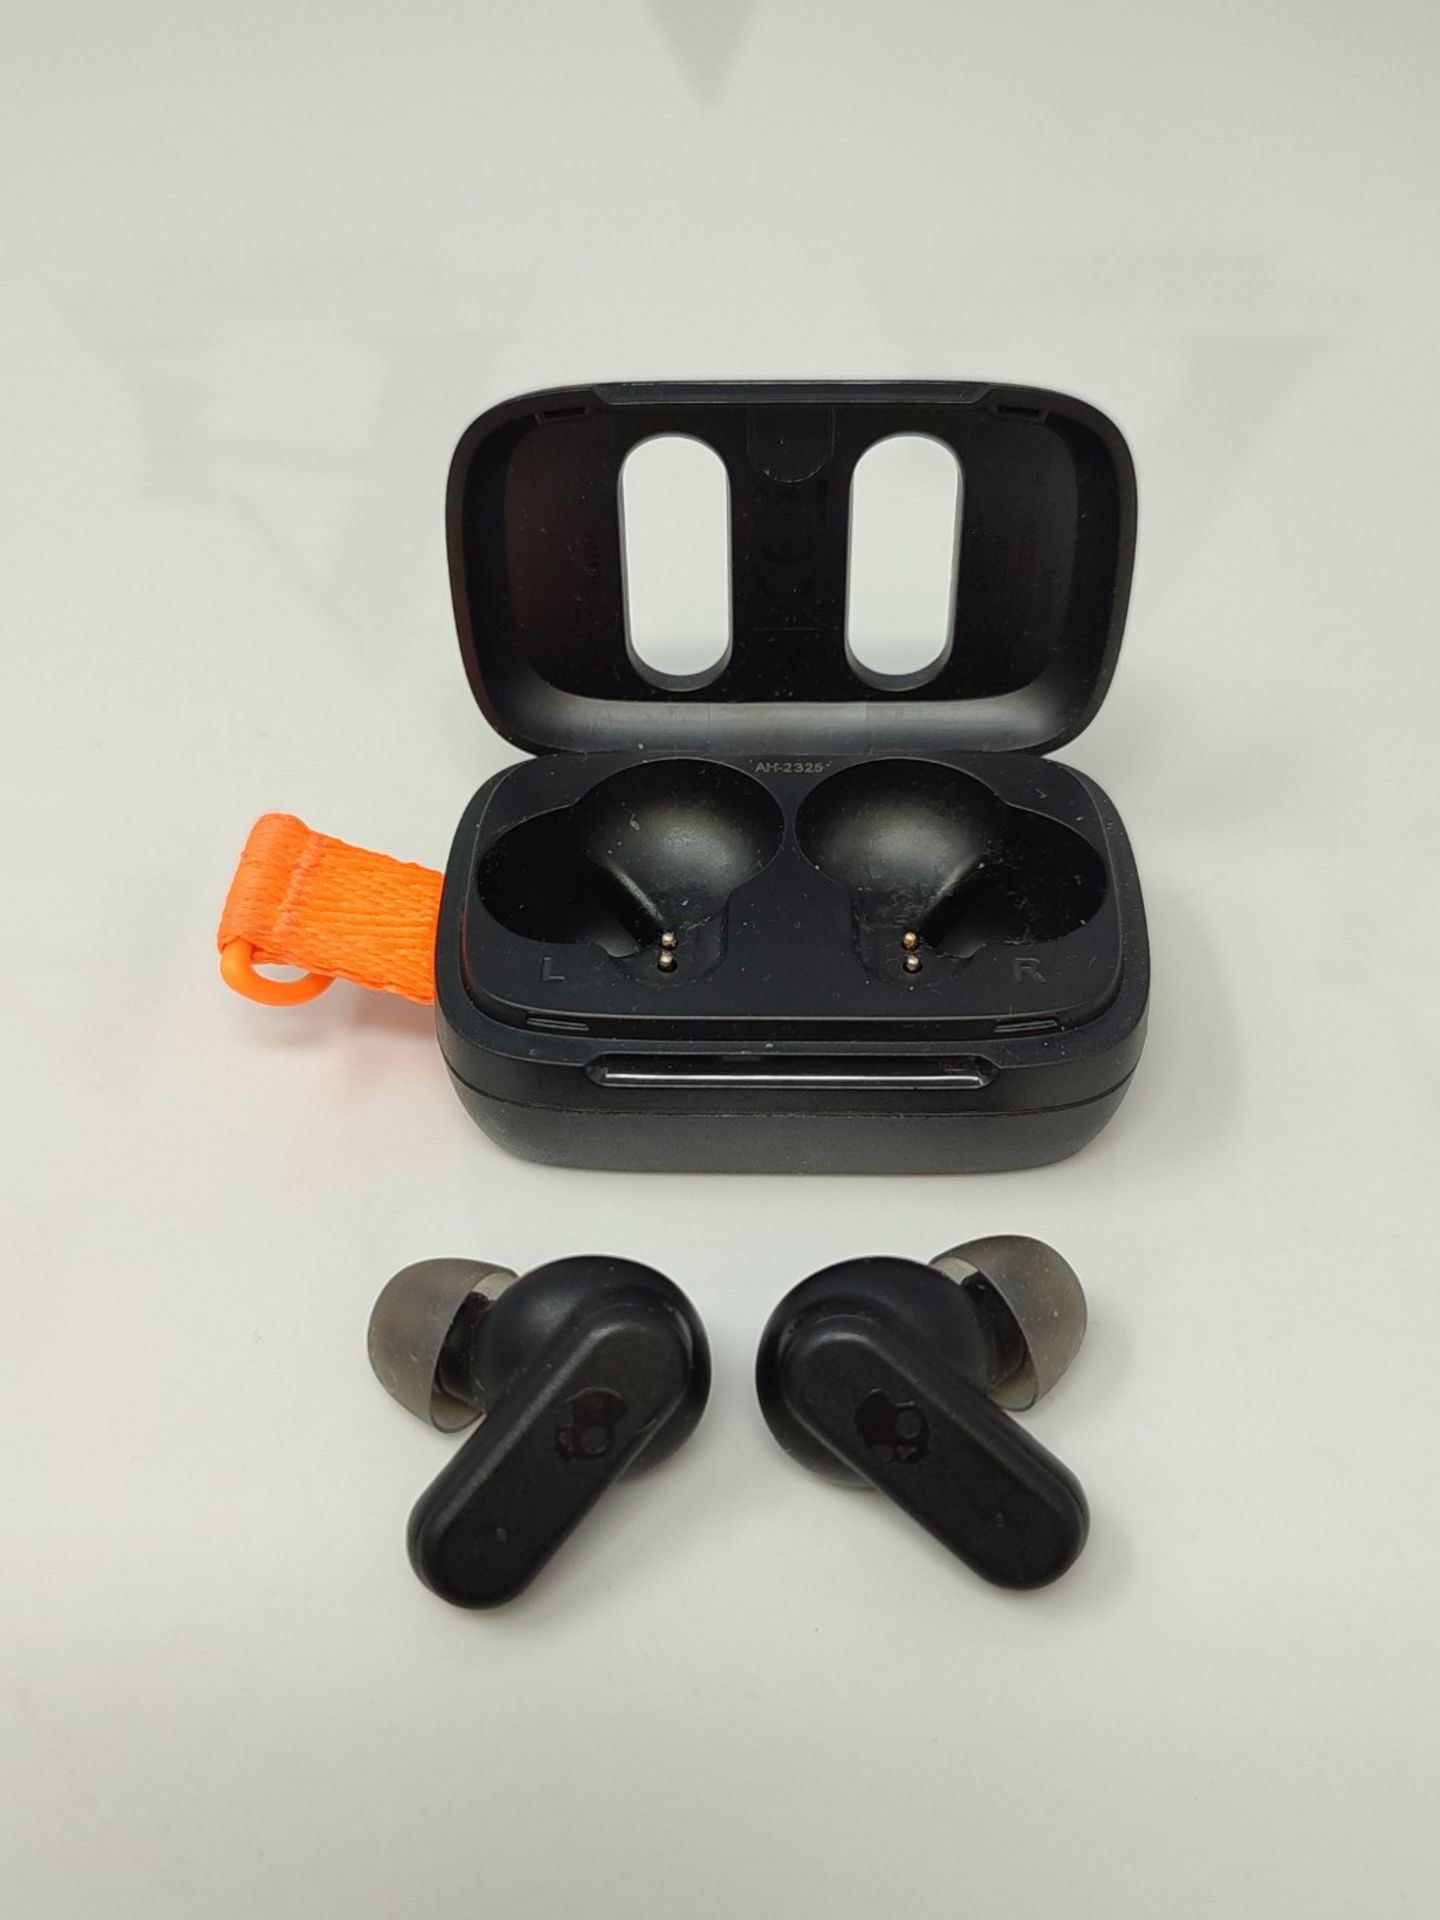 Skullcandy Dime 3 In-Ear Wireless Headphones, 20 hours battery life, microphone, compa - Image 3 of 3